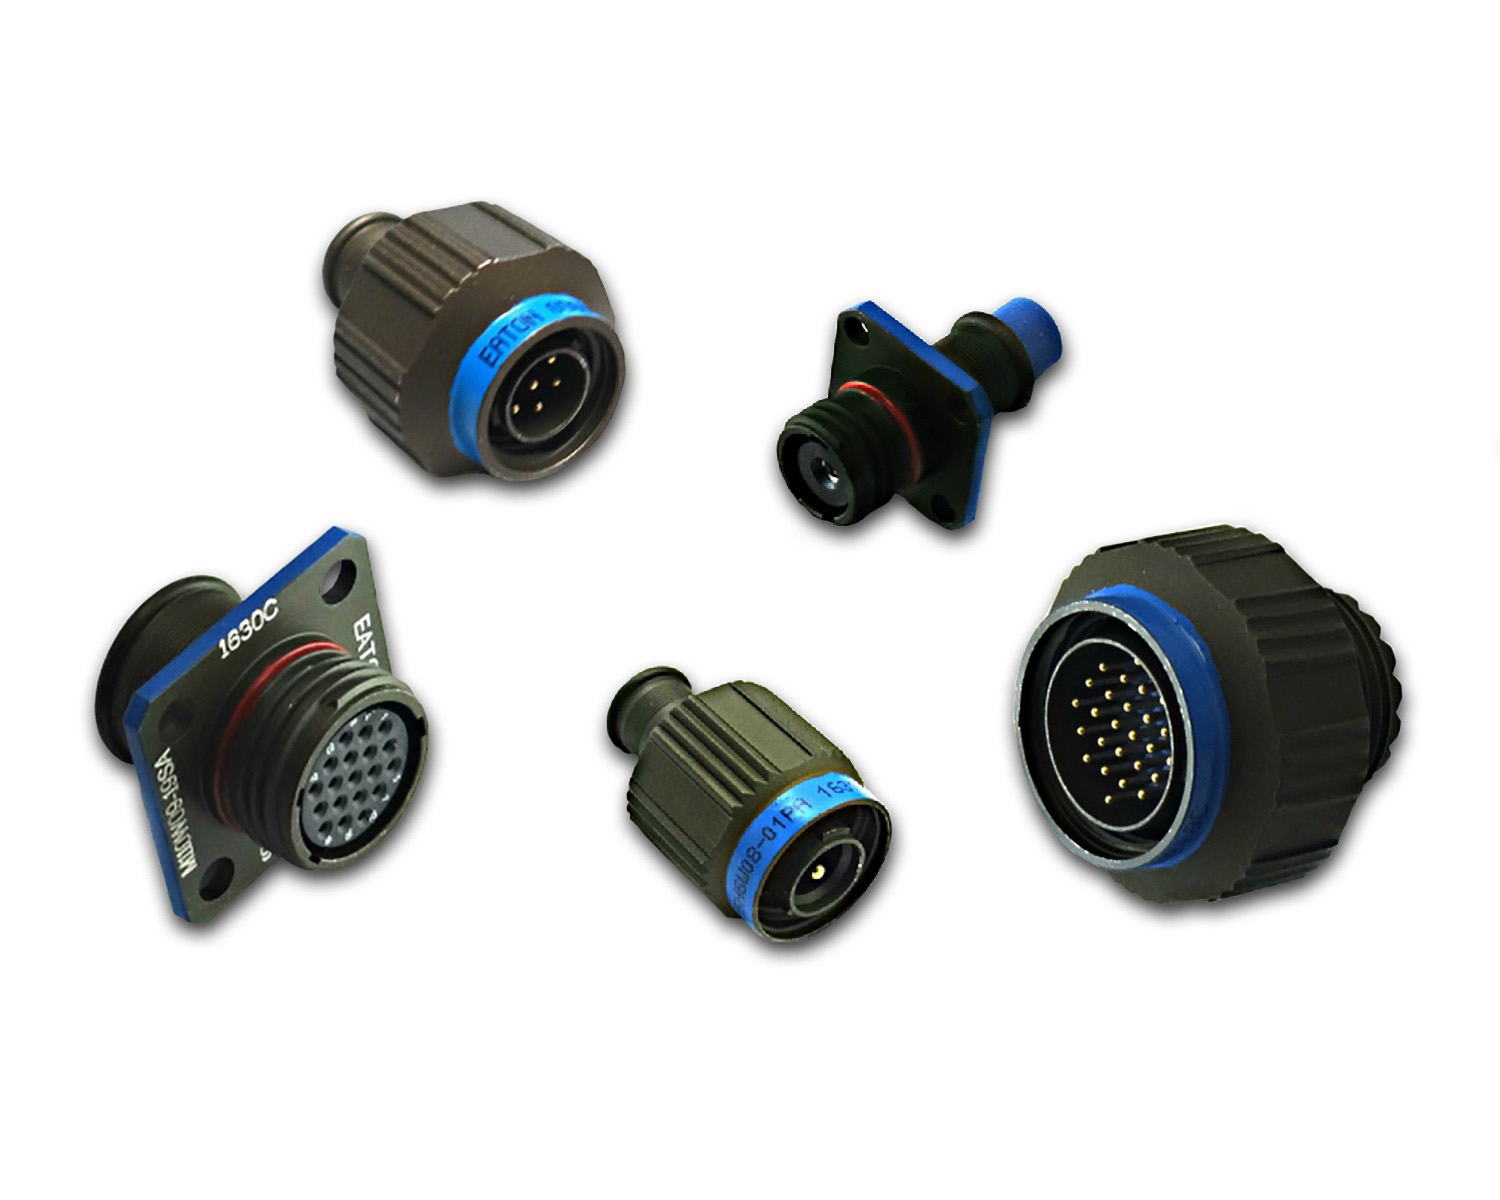 CDM Electronics Now Stocks the Latest Generation of Eaton's Micro-Military Circular Connectors